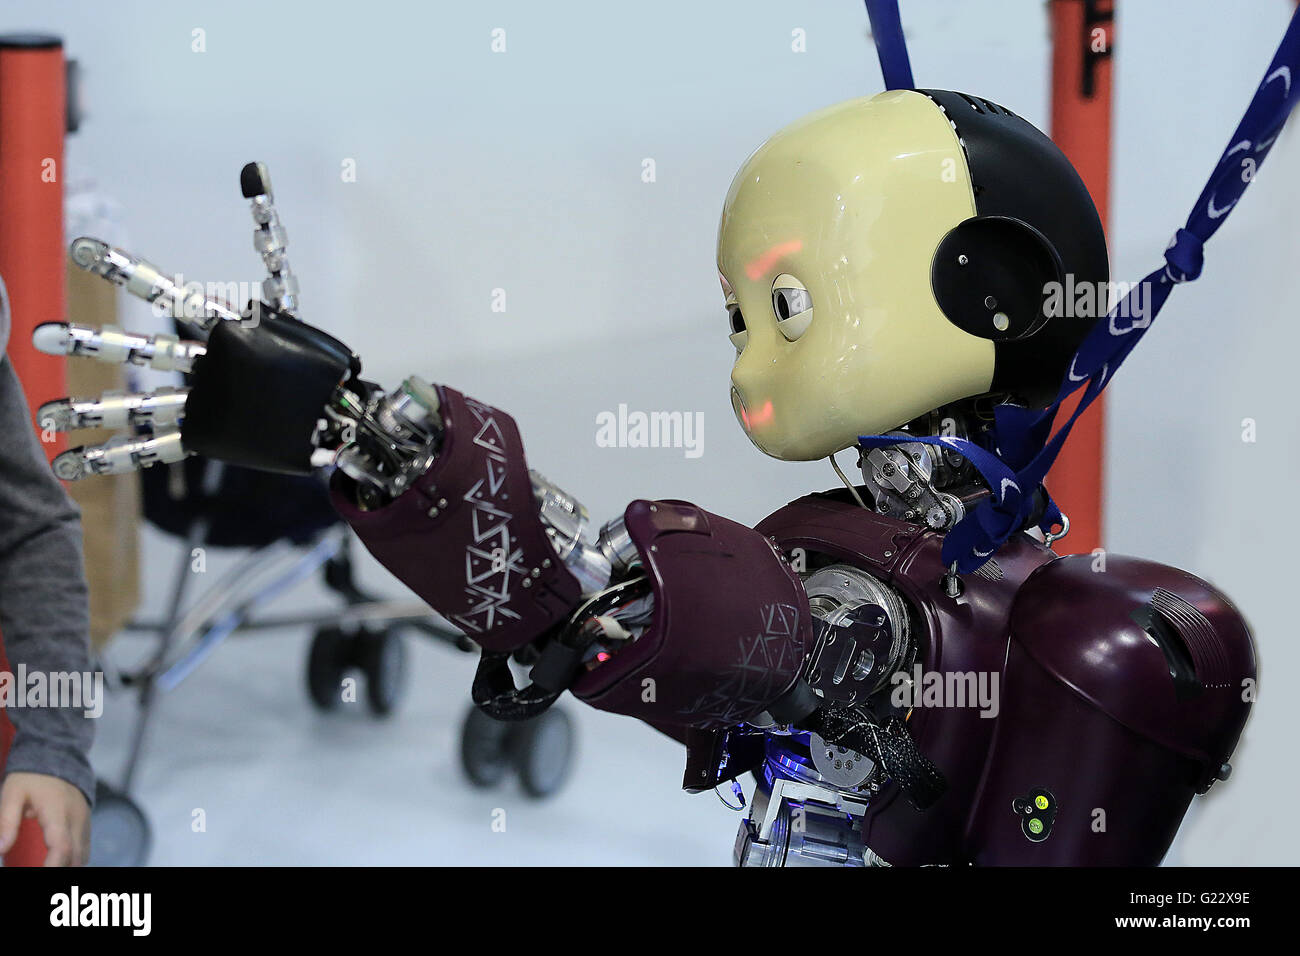 Icub Robot High Resolution Stock Photography and Images - Alamy